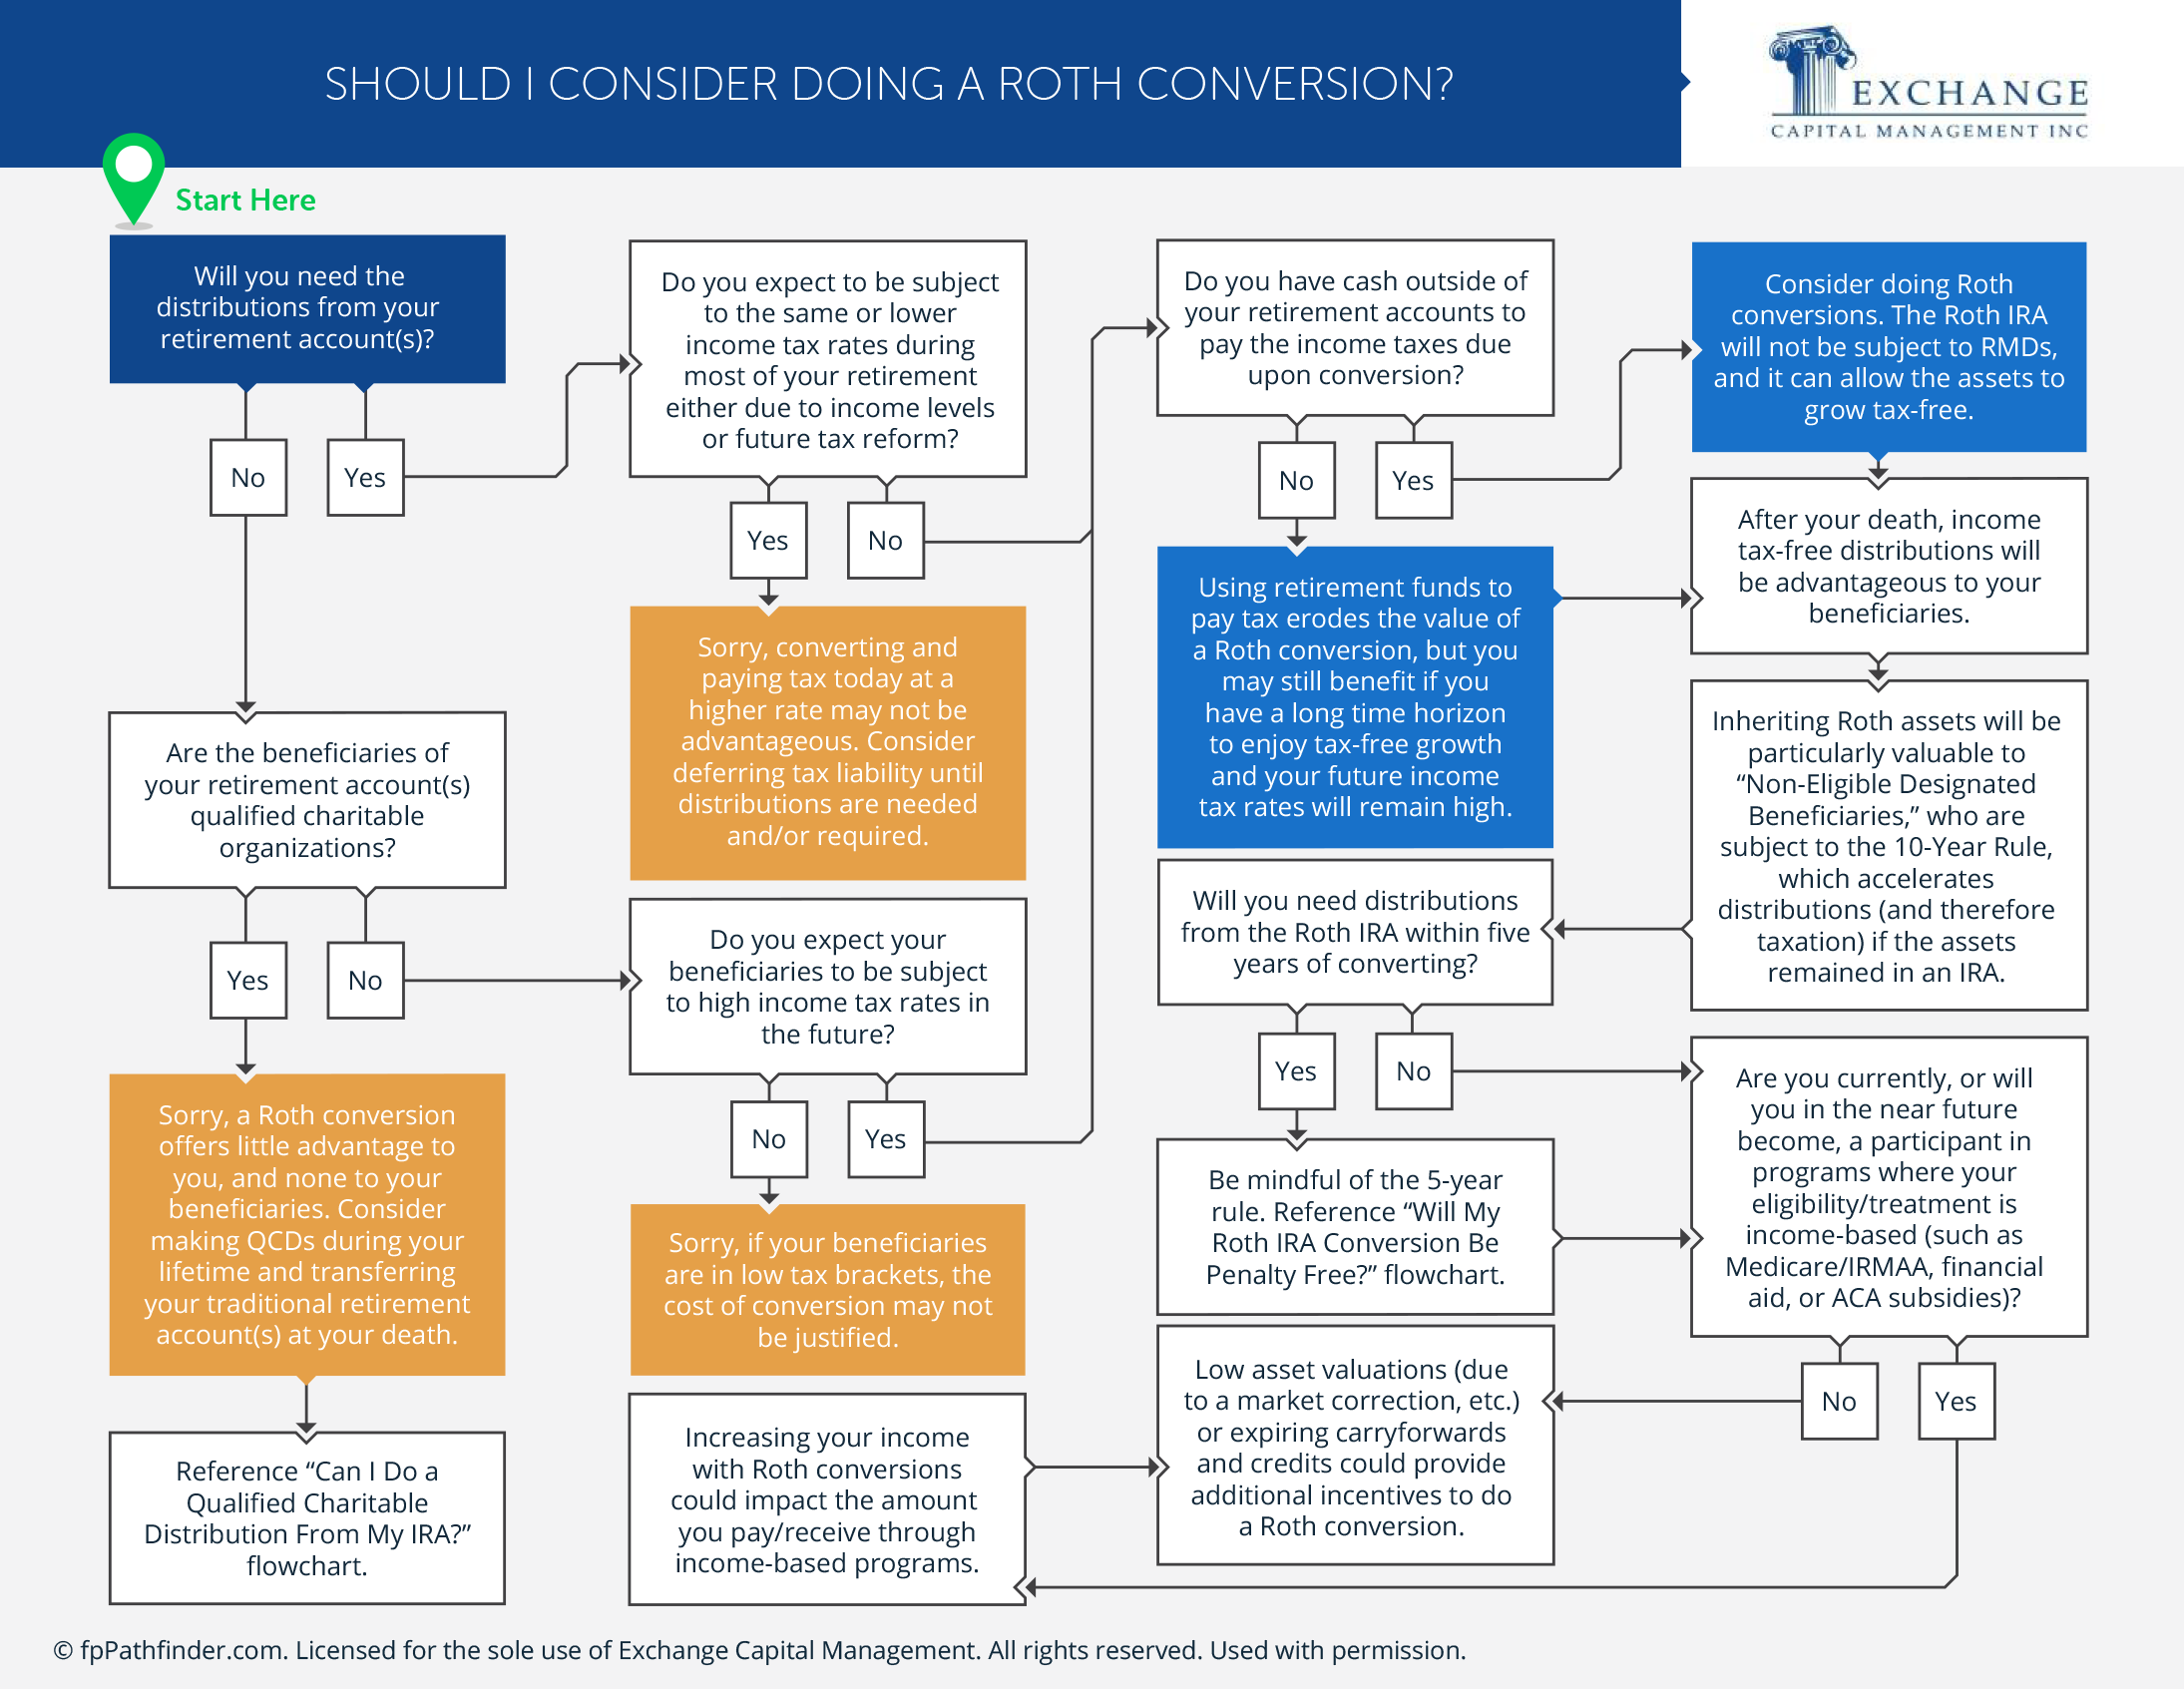 Should I Consider Doing a Roth Conversion?